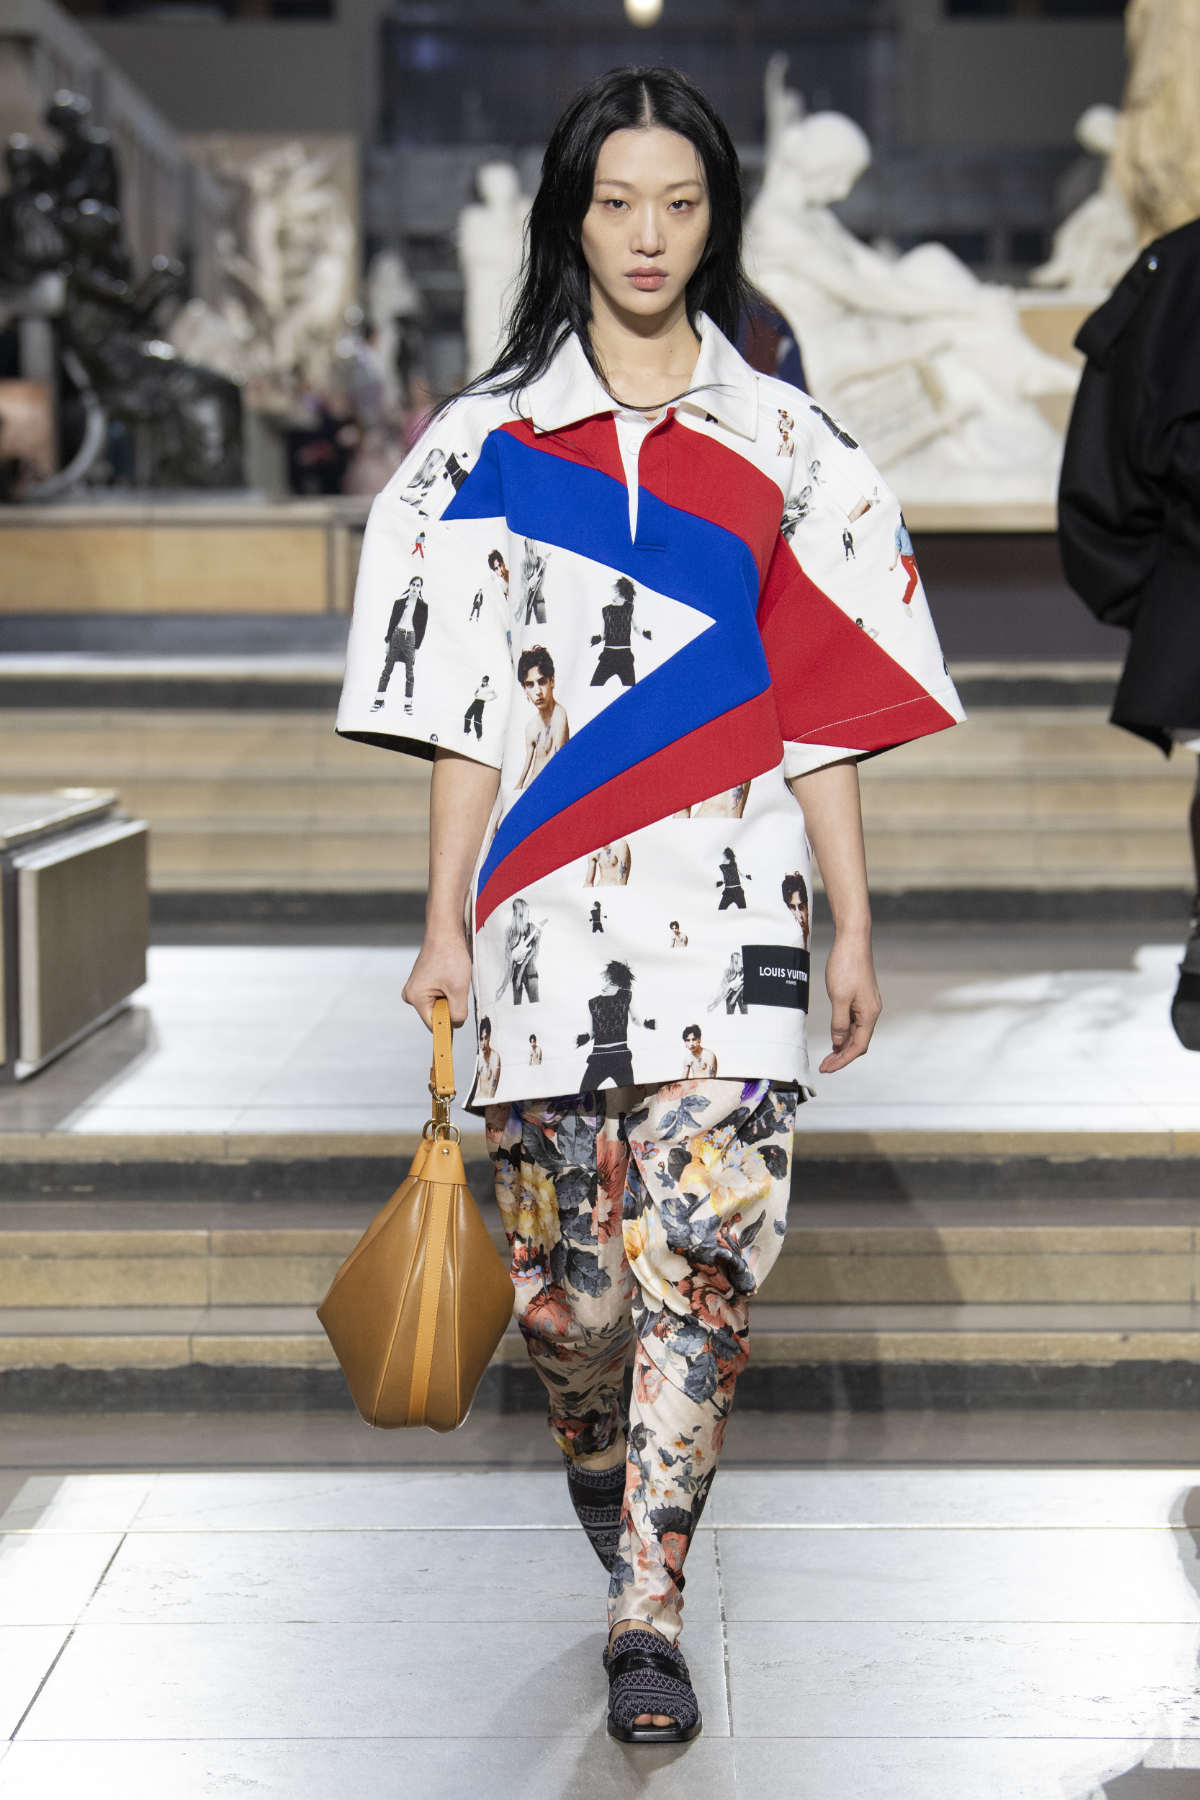 Louis Vuitton Women's Fall Winter collection redefines 'French